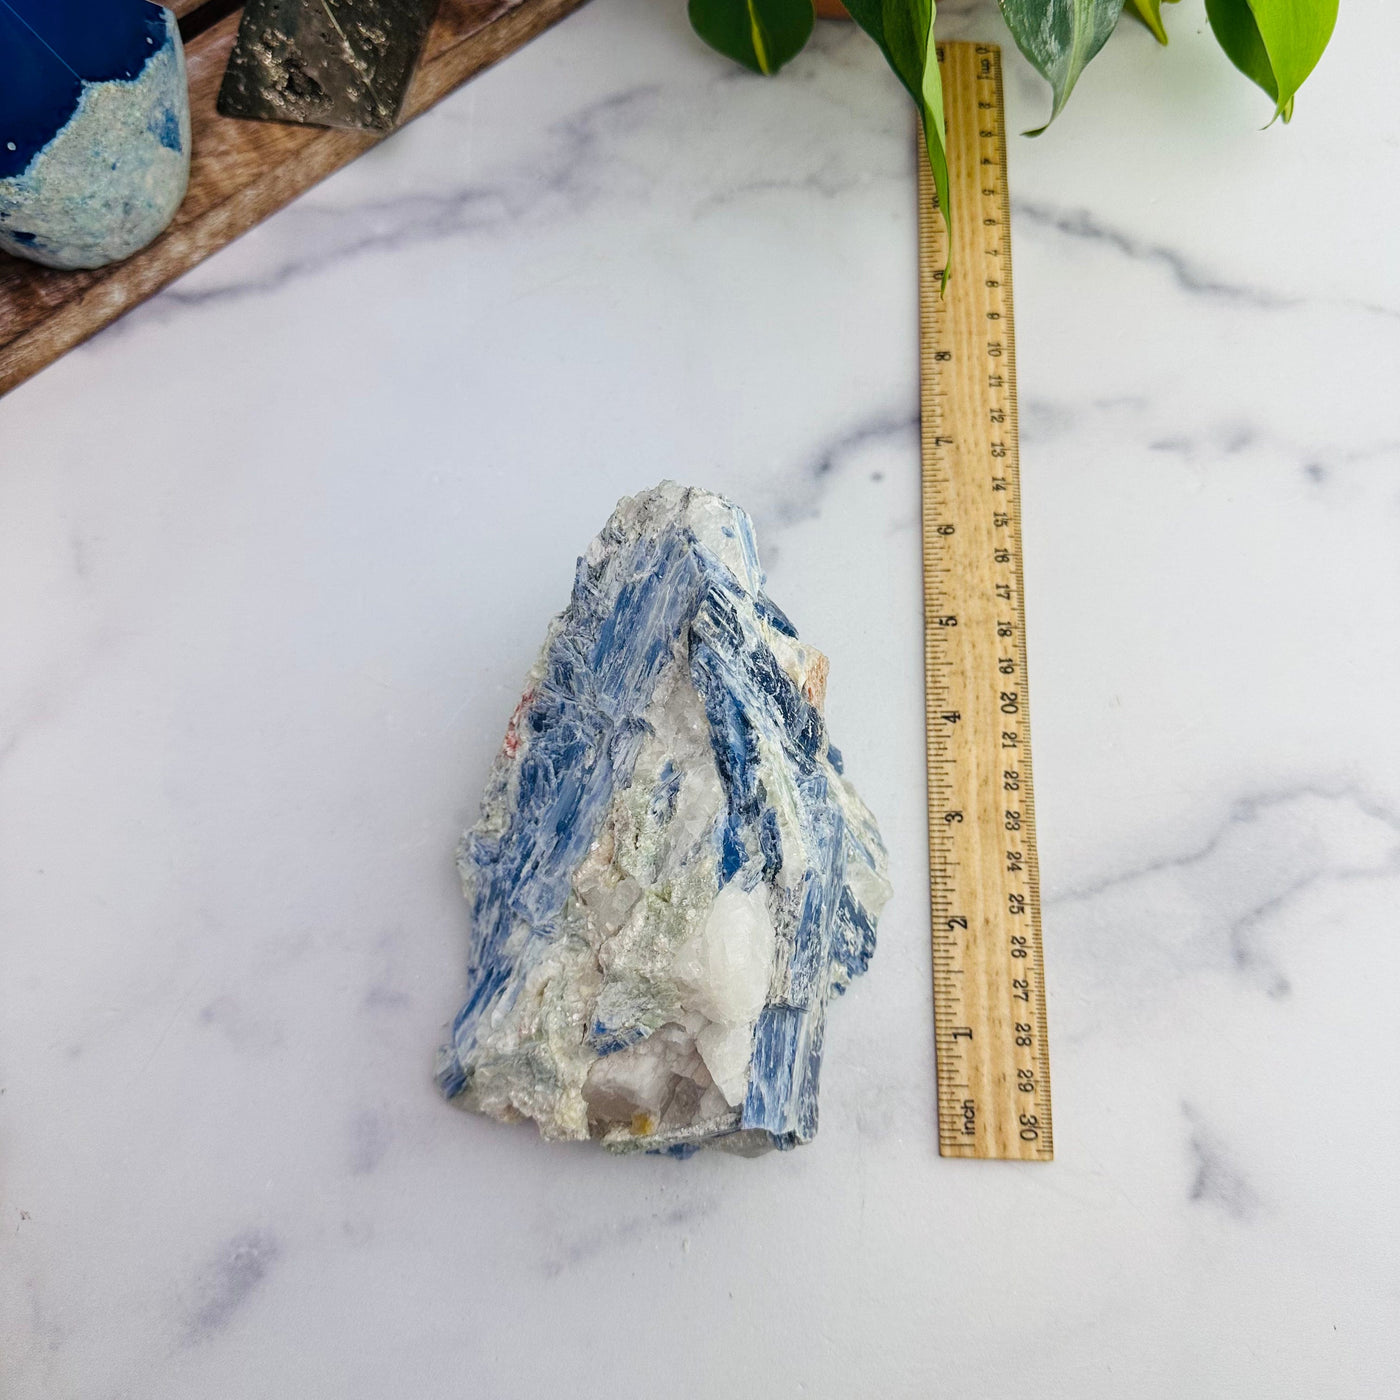 Blue Formation Kyanite With Ruler For Reference 